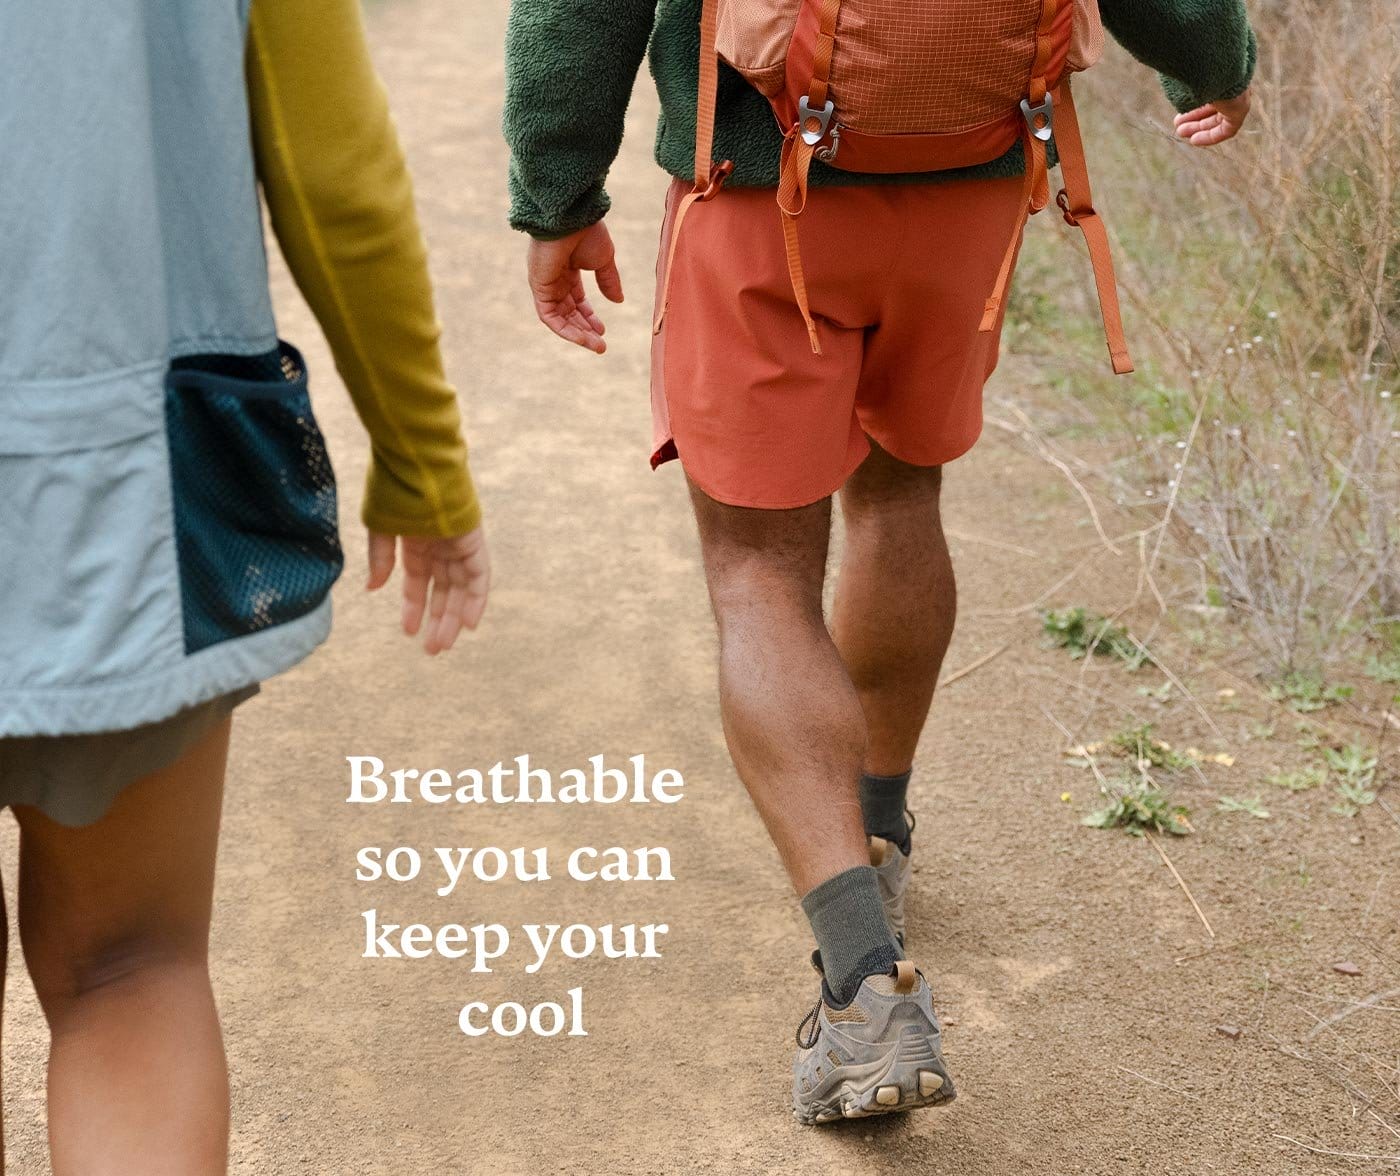 Breathable so you can keep your cool